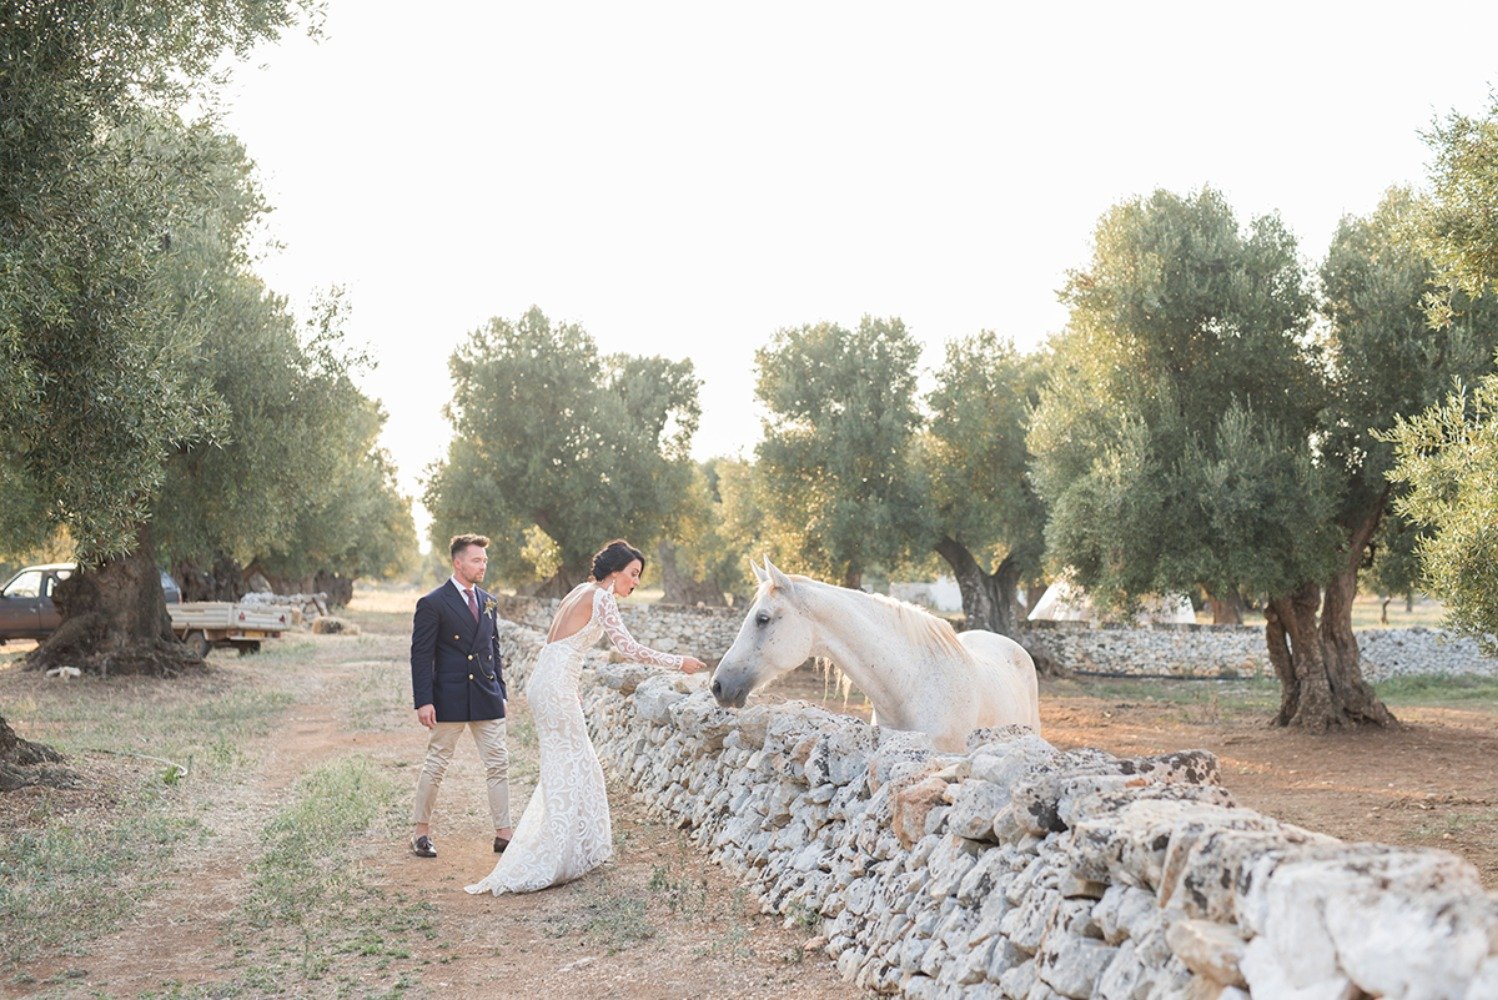 sweet candid wedding couple and horse